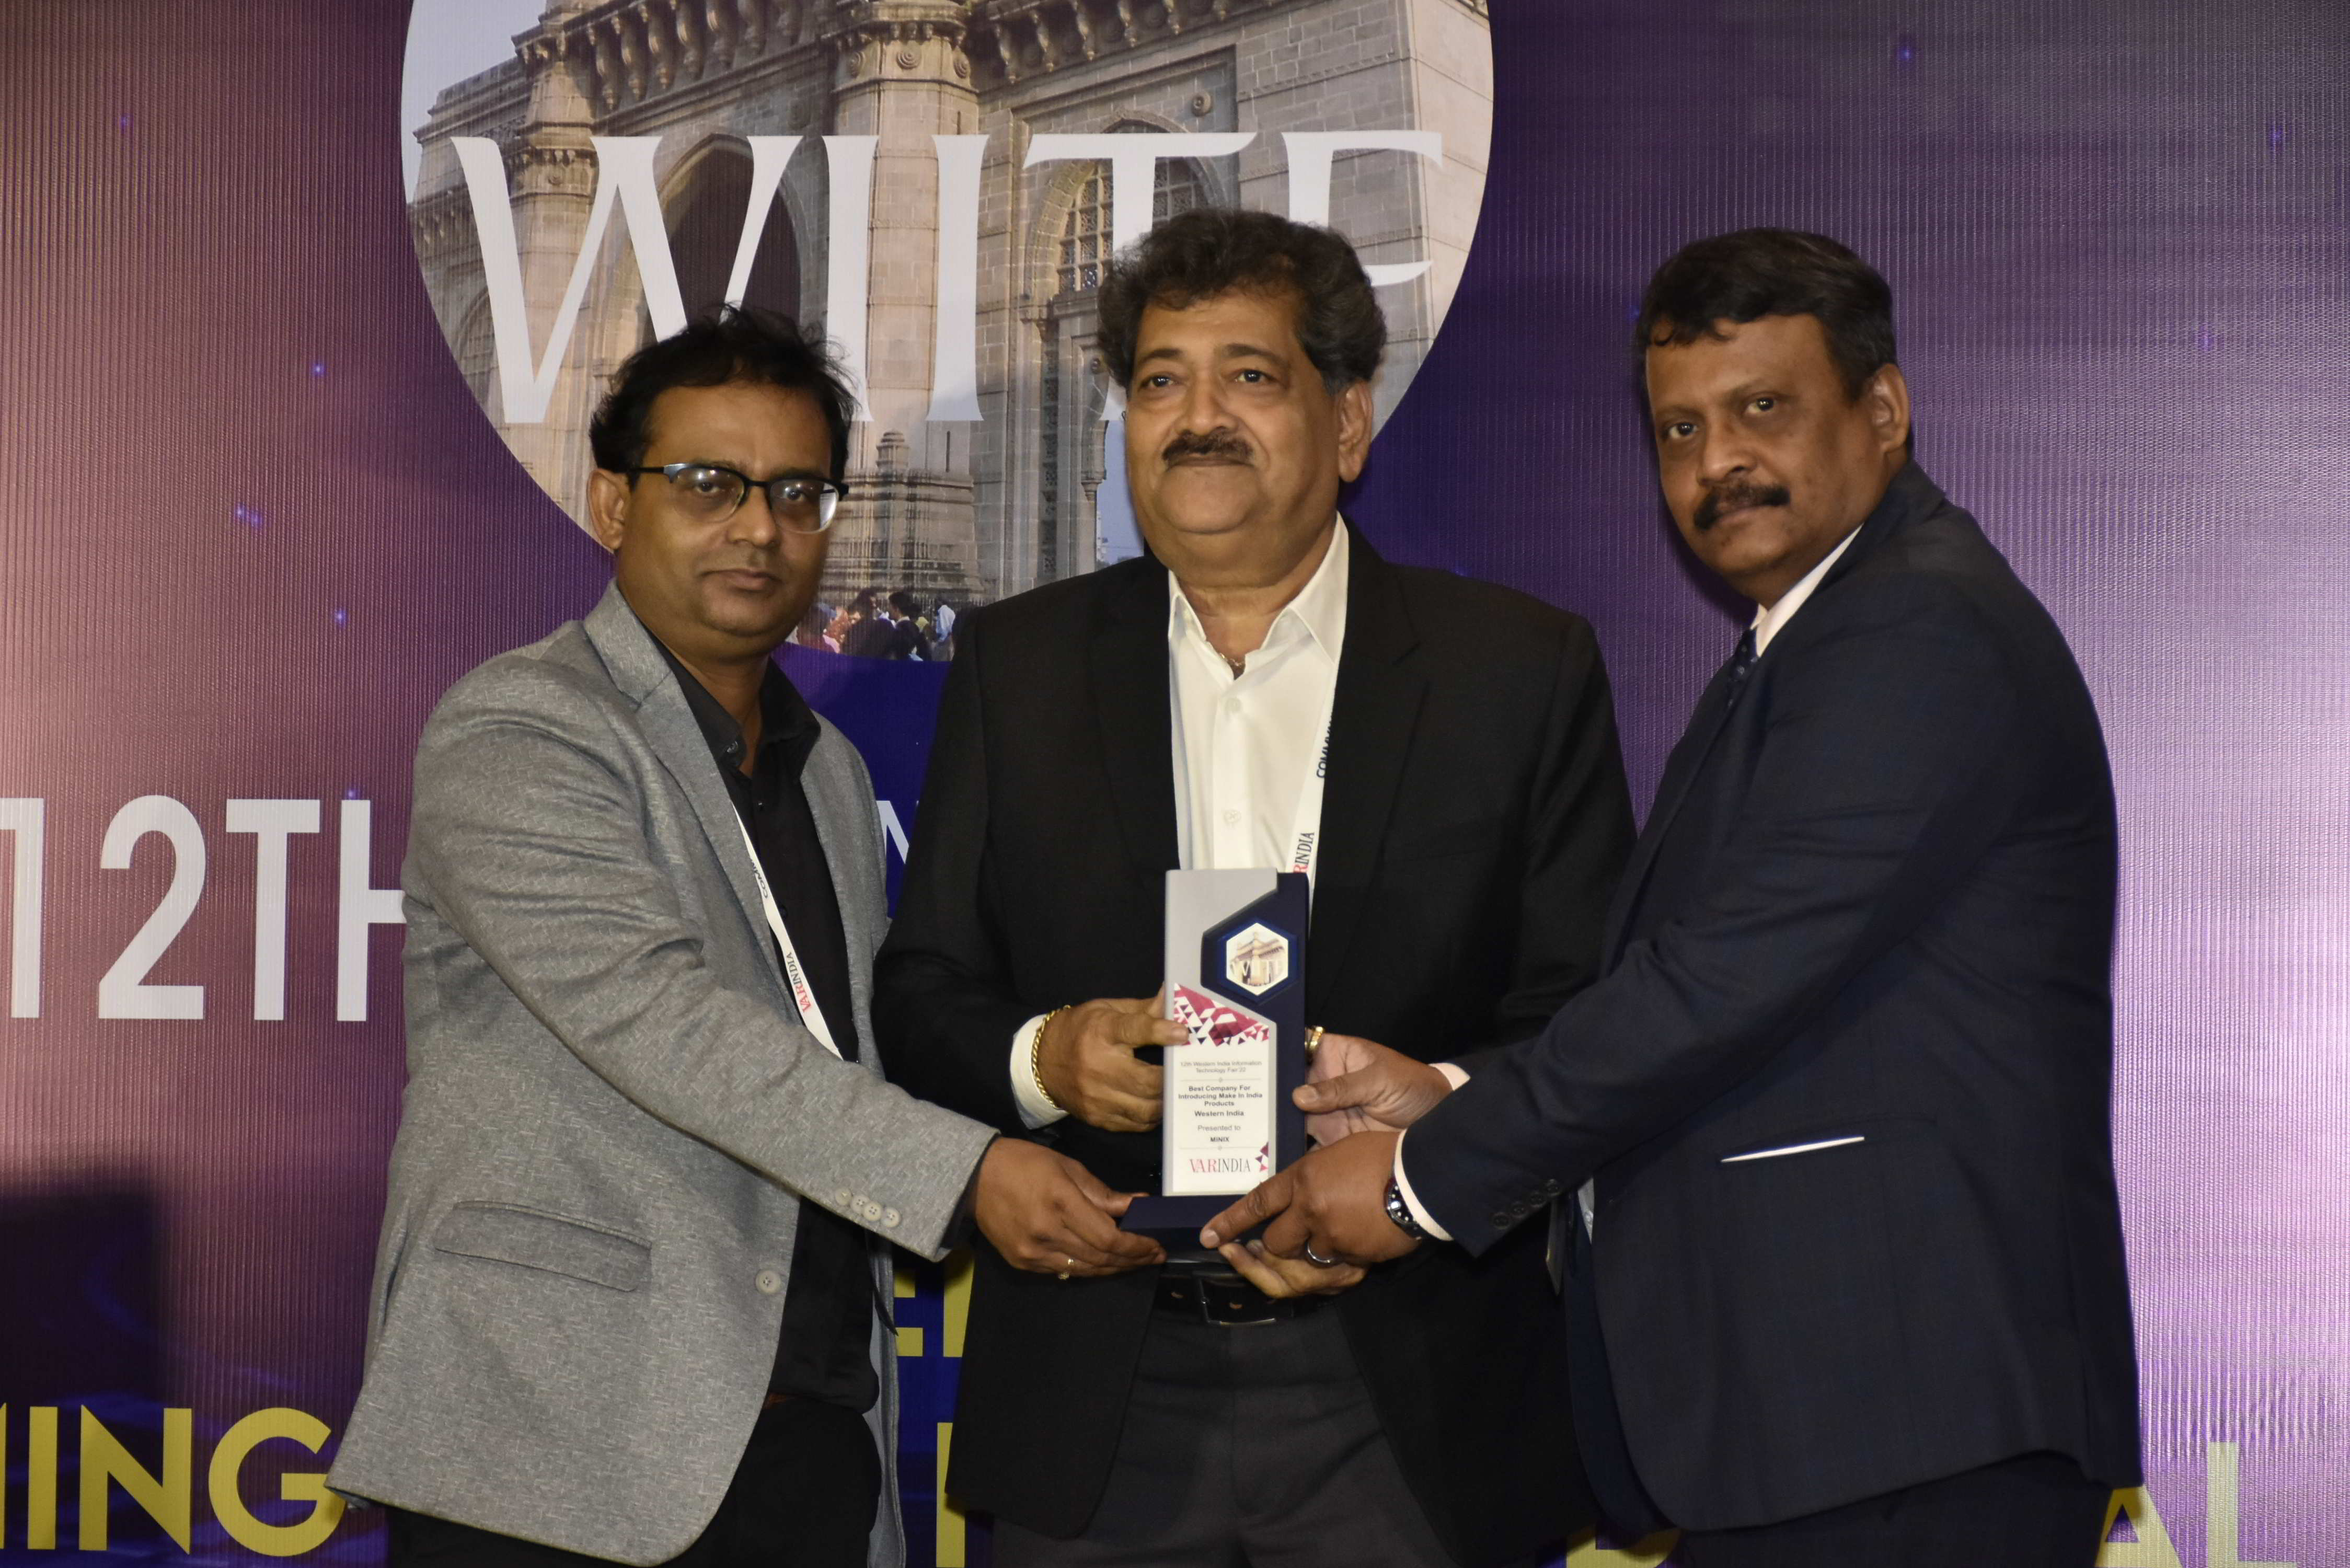 The Best Company for introducing "Make In India products" was won by MINIX.